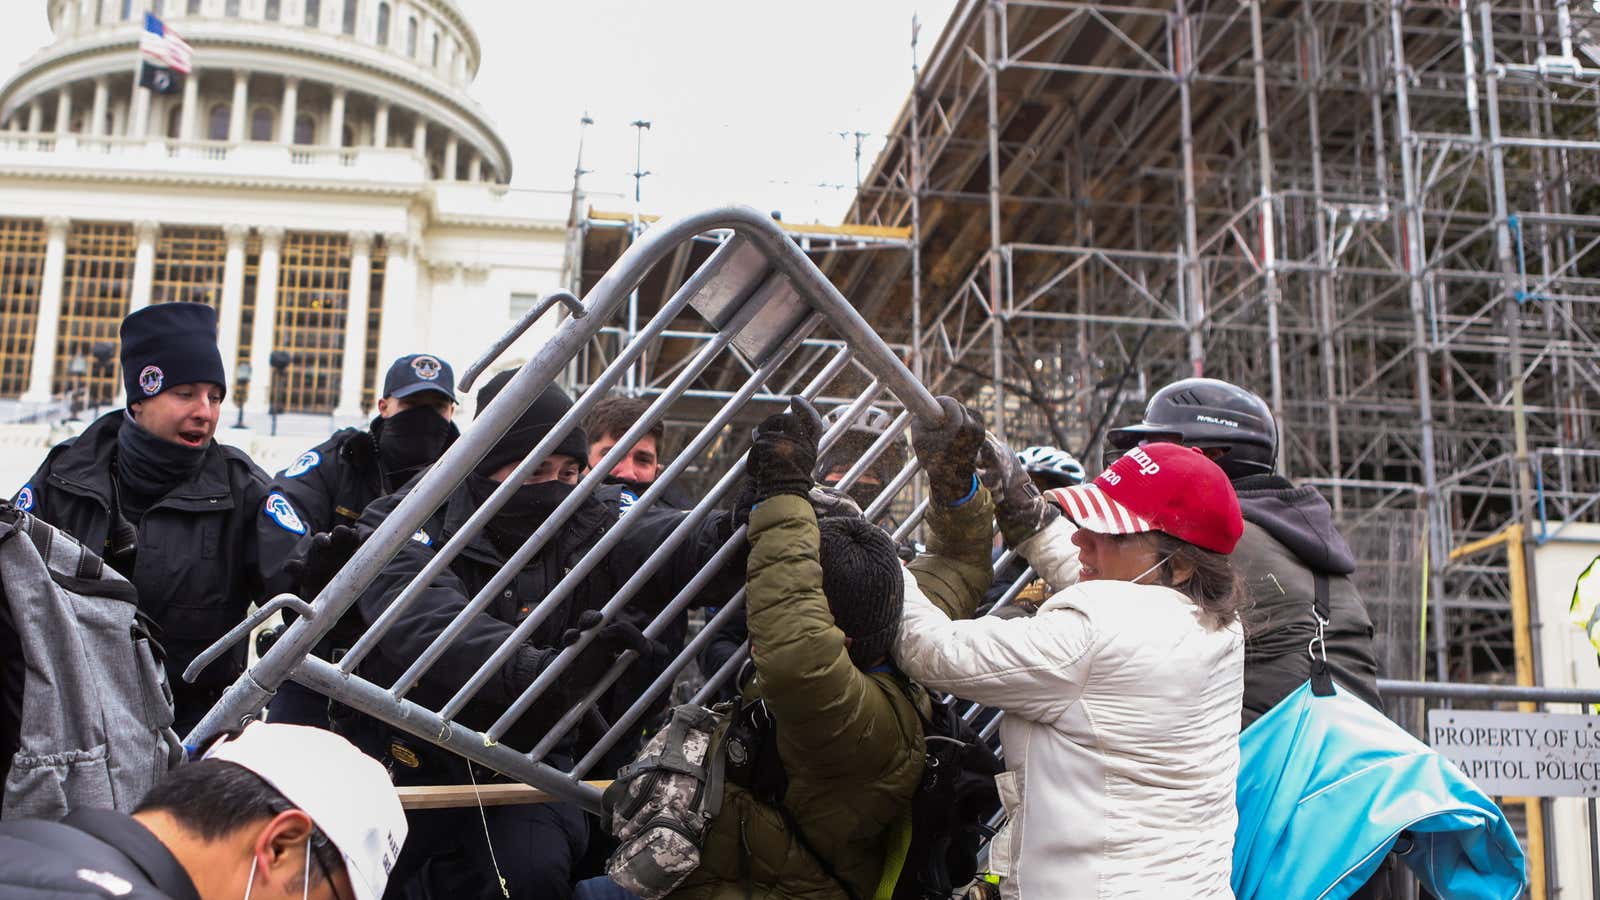 A pro-Trump mob battled police and overran the Capitol in a scene that drew concern from world leaders.